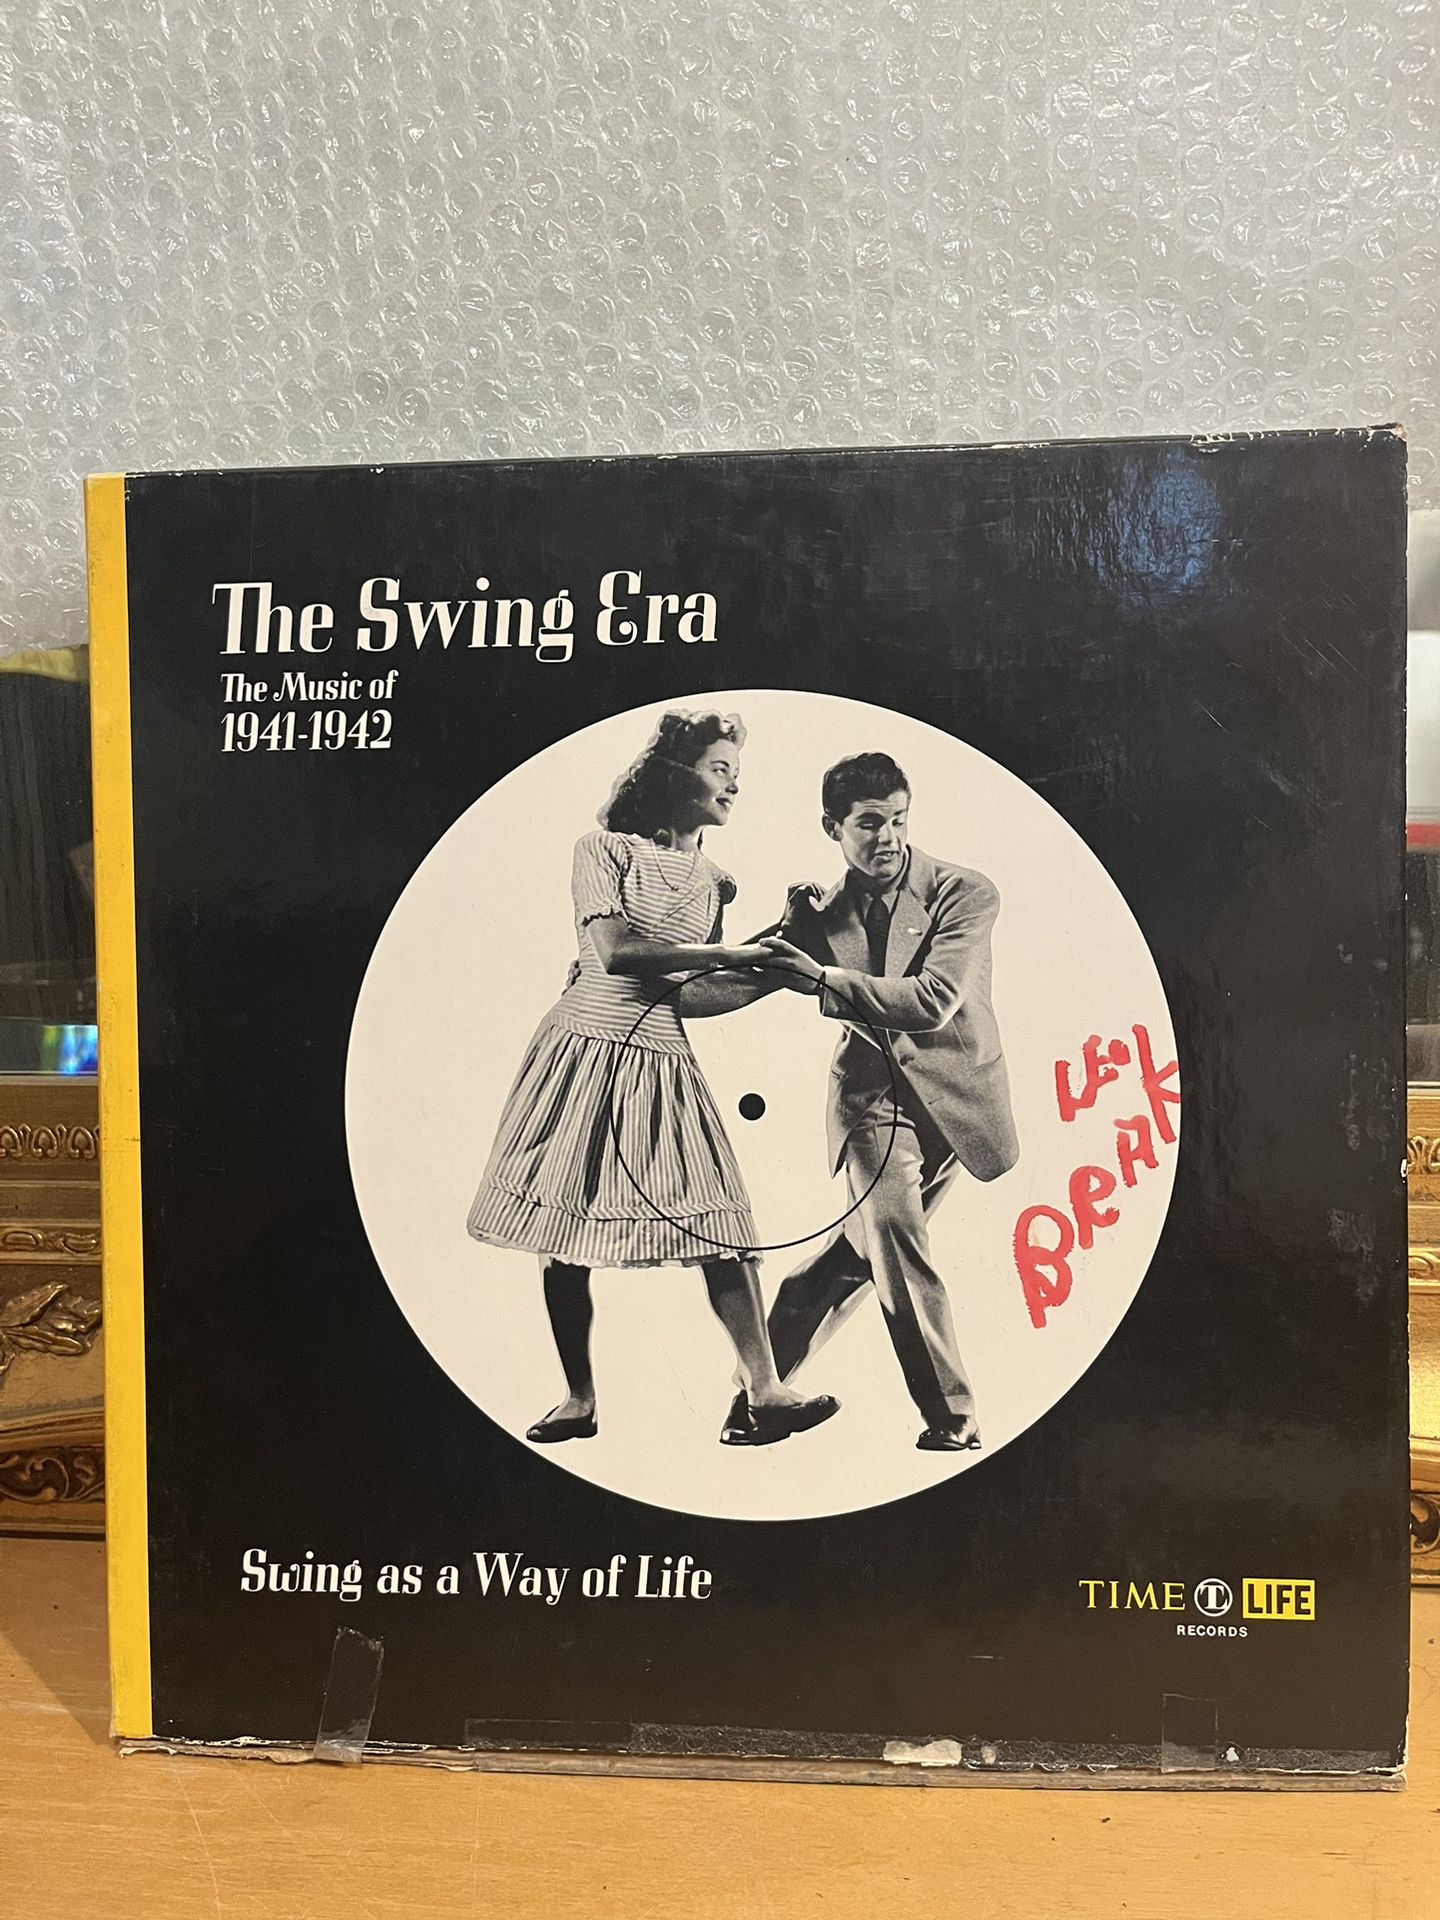 VTG THE SWING ERA "The Music Of 1(contact info removed)"  3 LP Box Set  64 Pg. Book ~Time Life